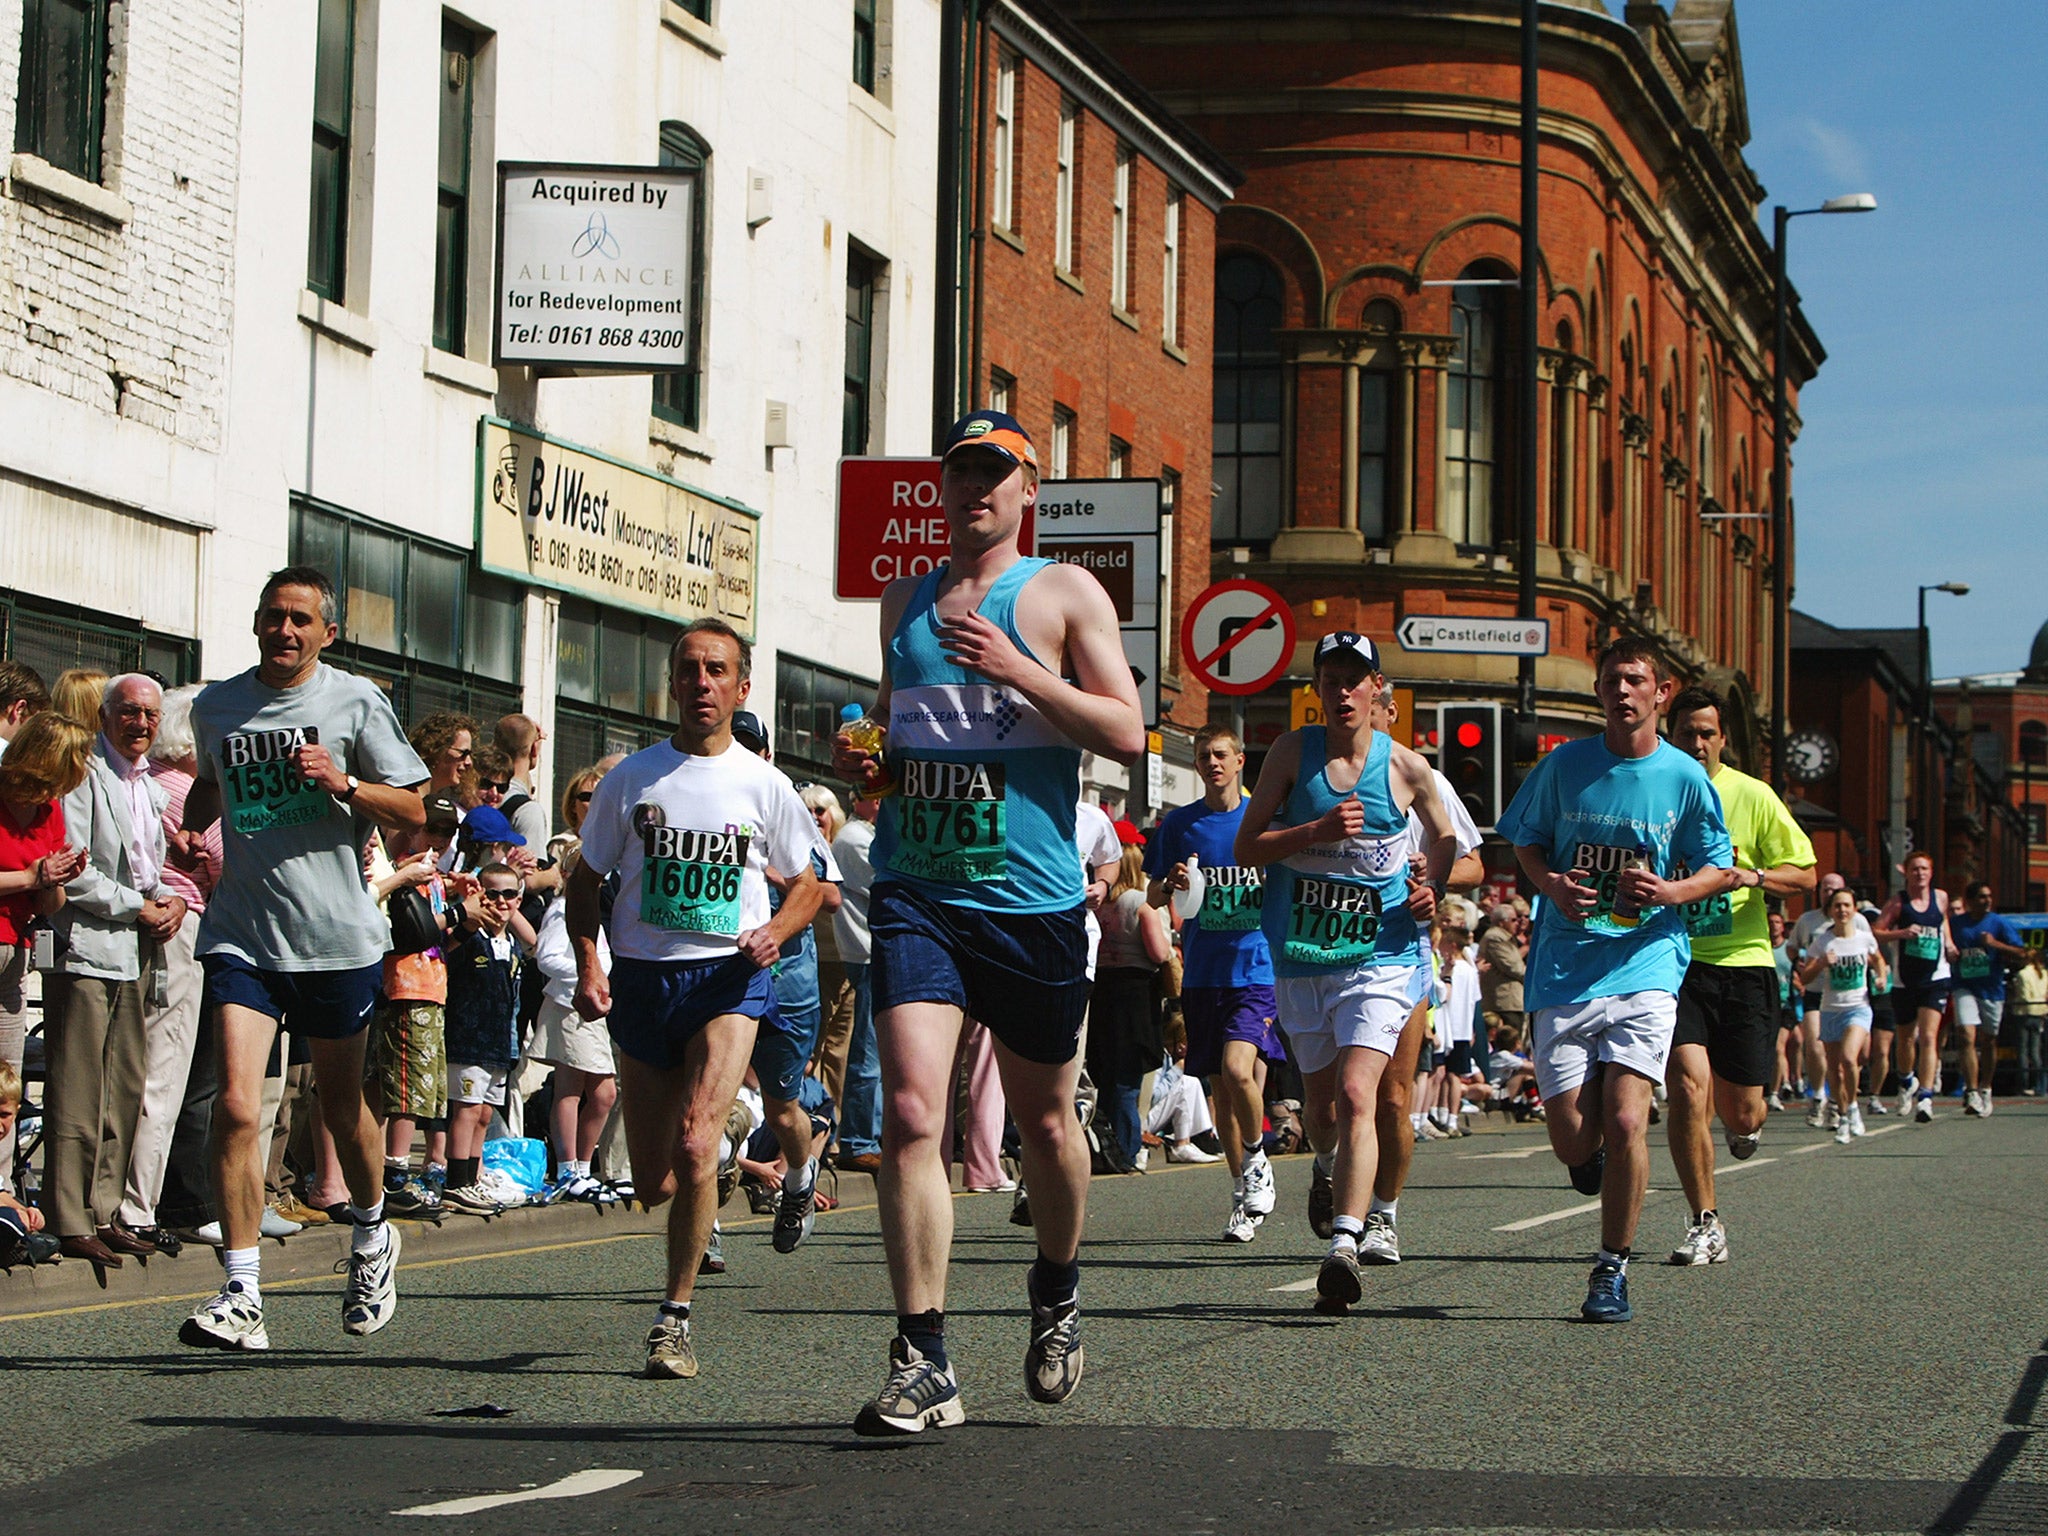 All times from the Manchester Marathon between 2013 and 2015 have been invalidated